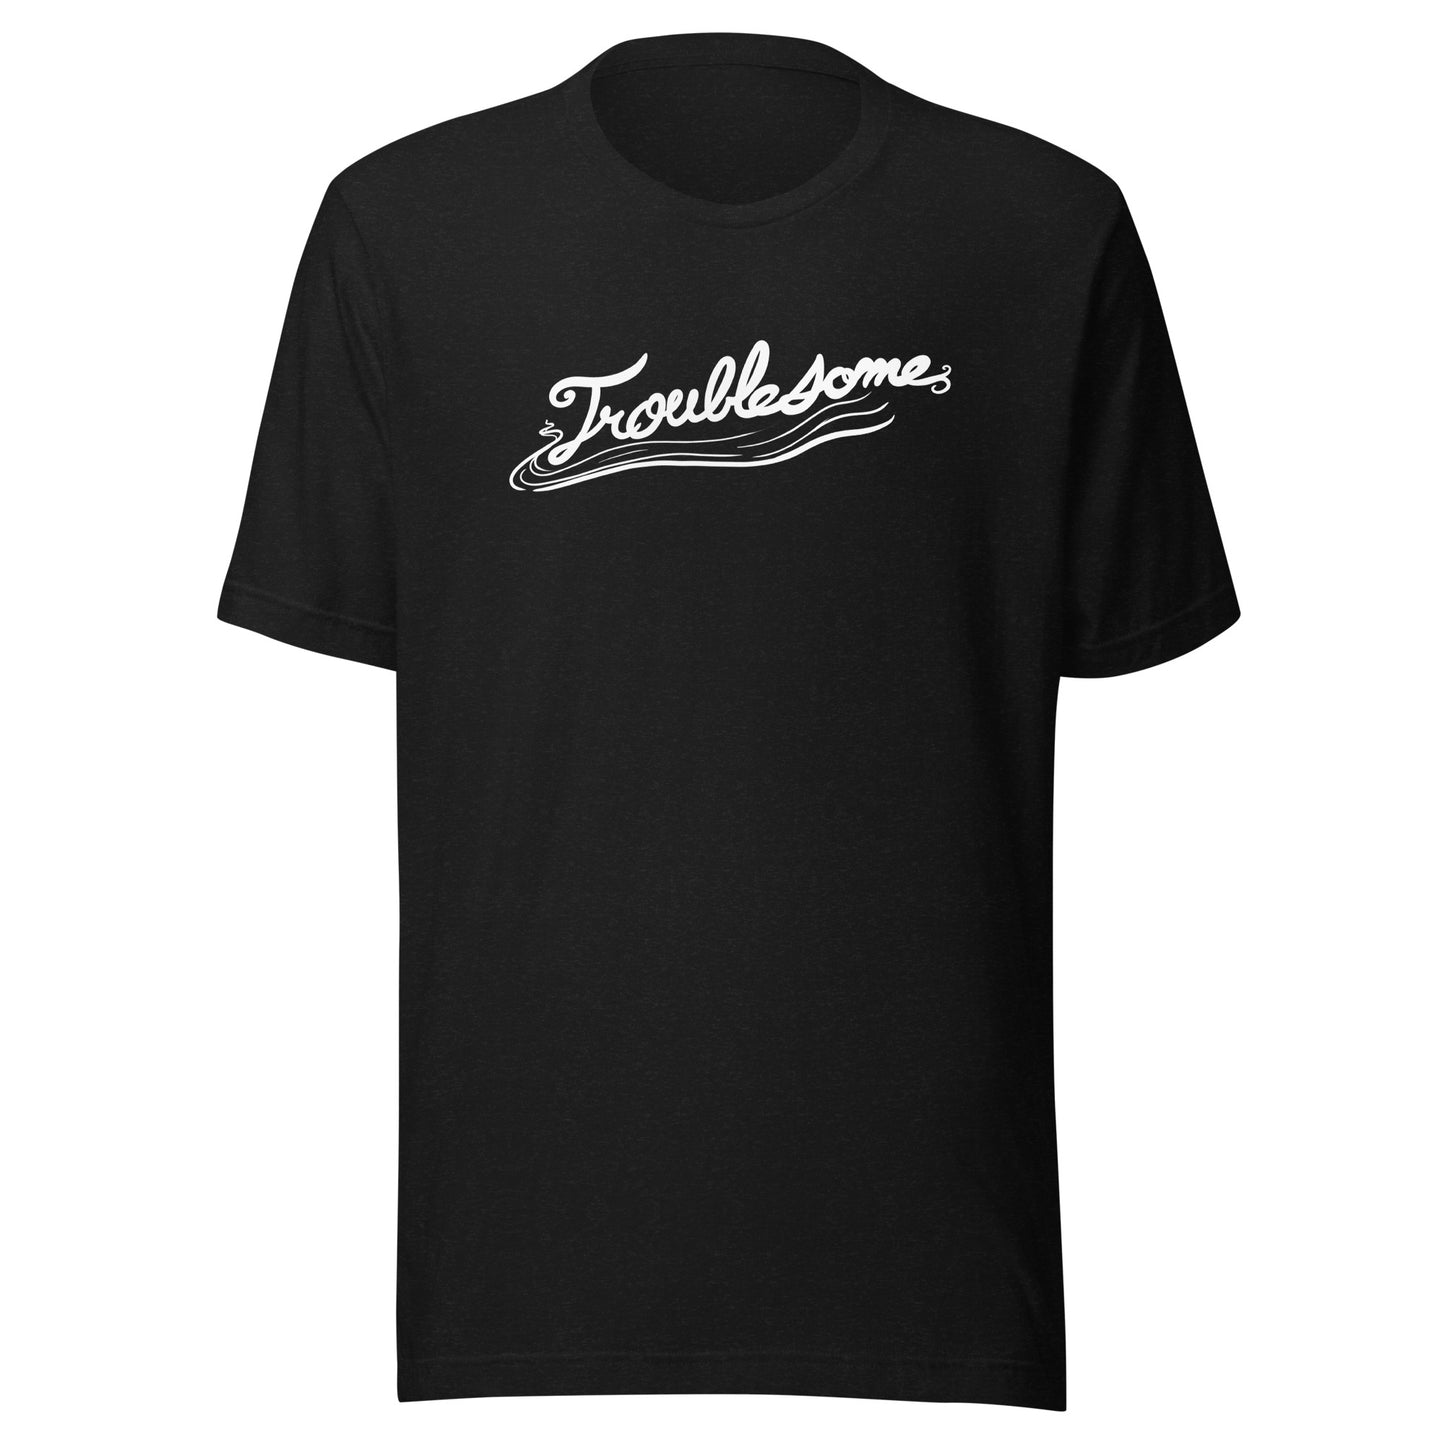 "Troublesome" T-Shirt